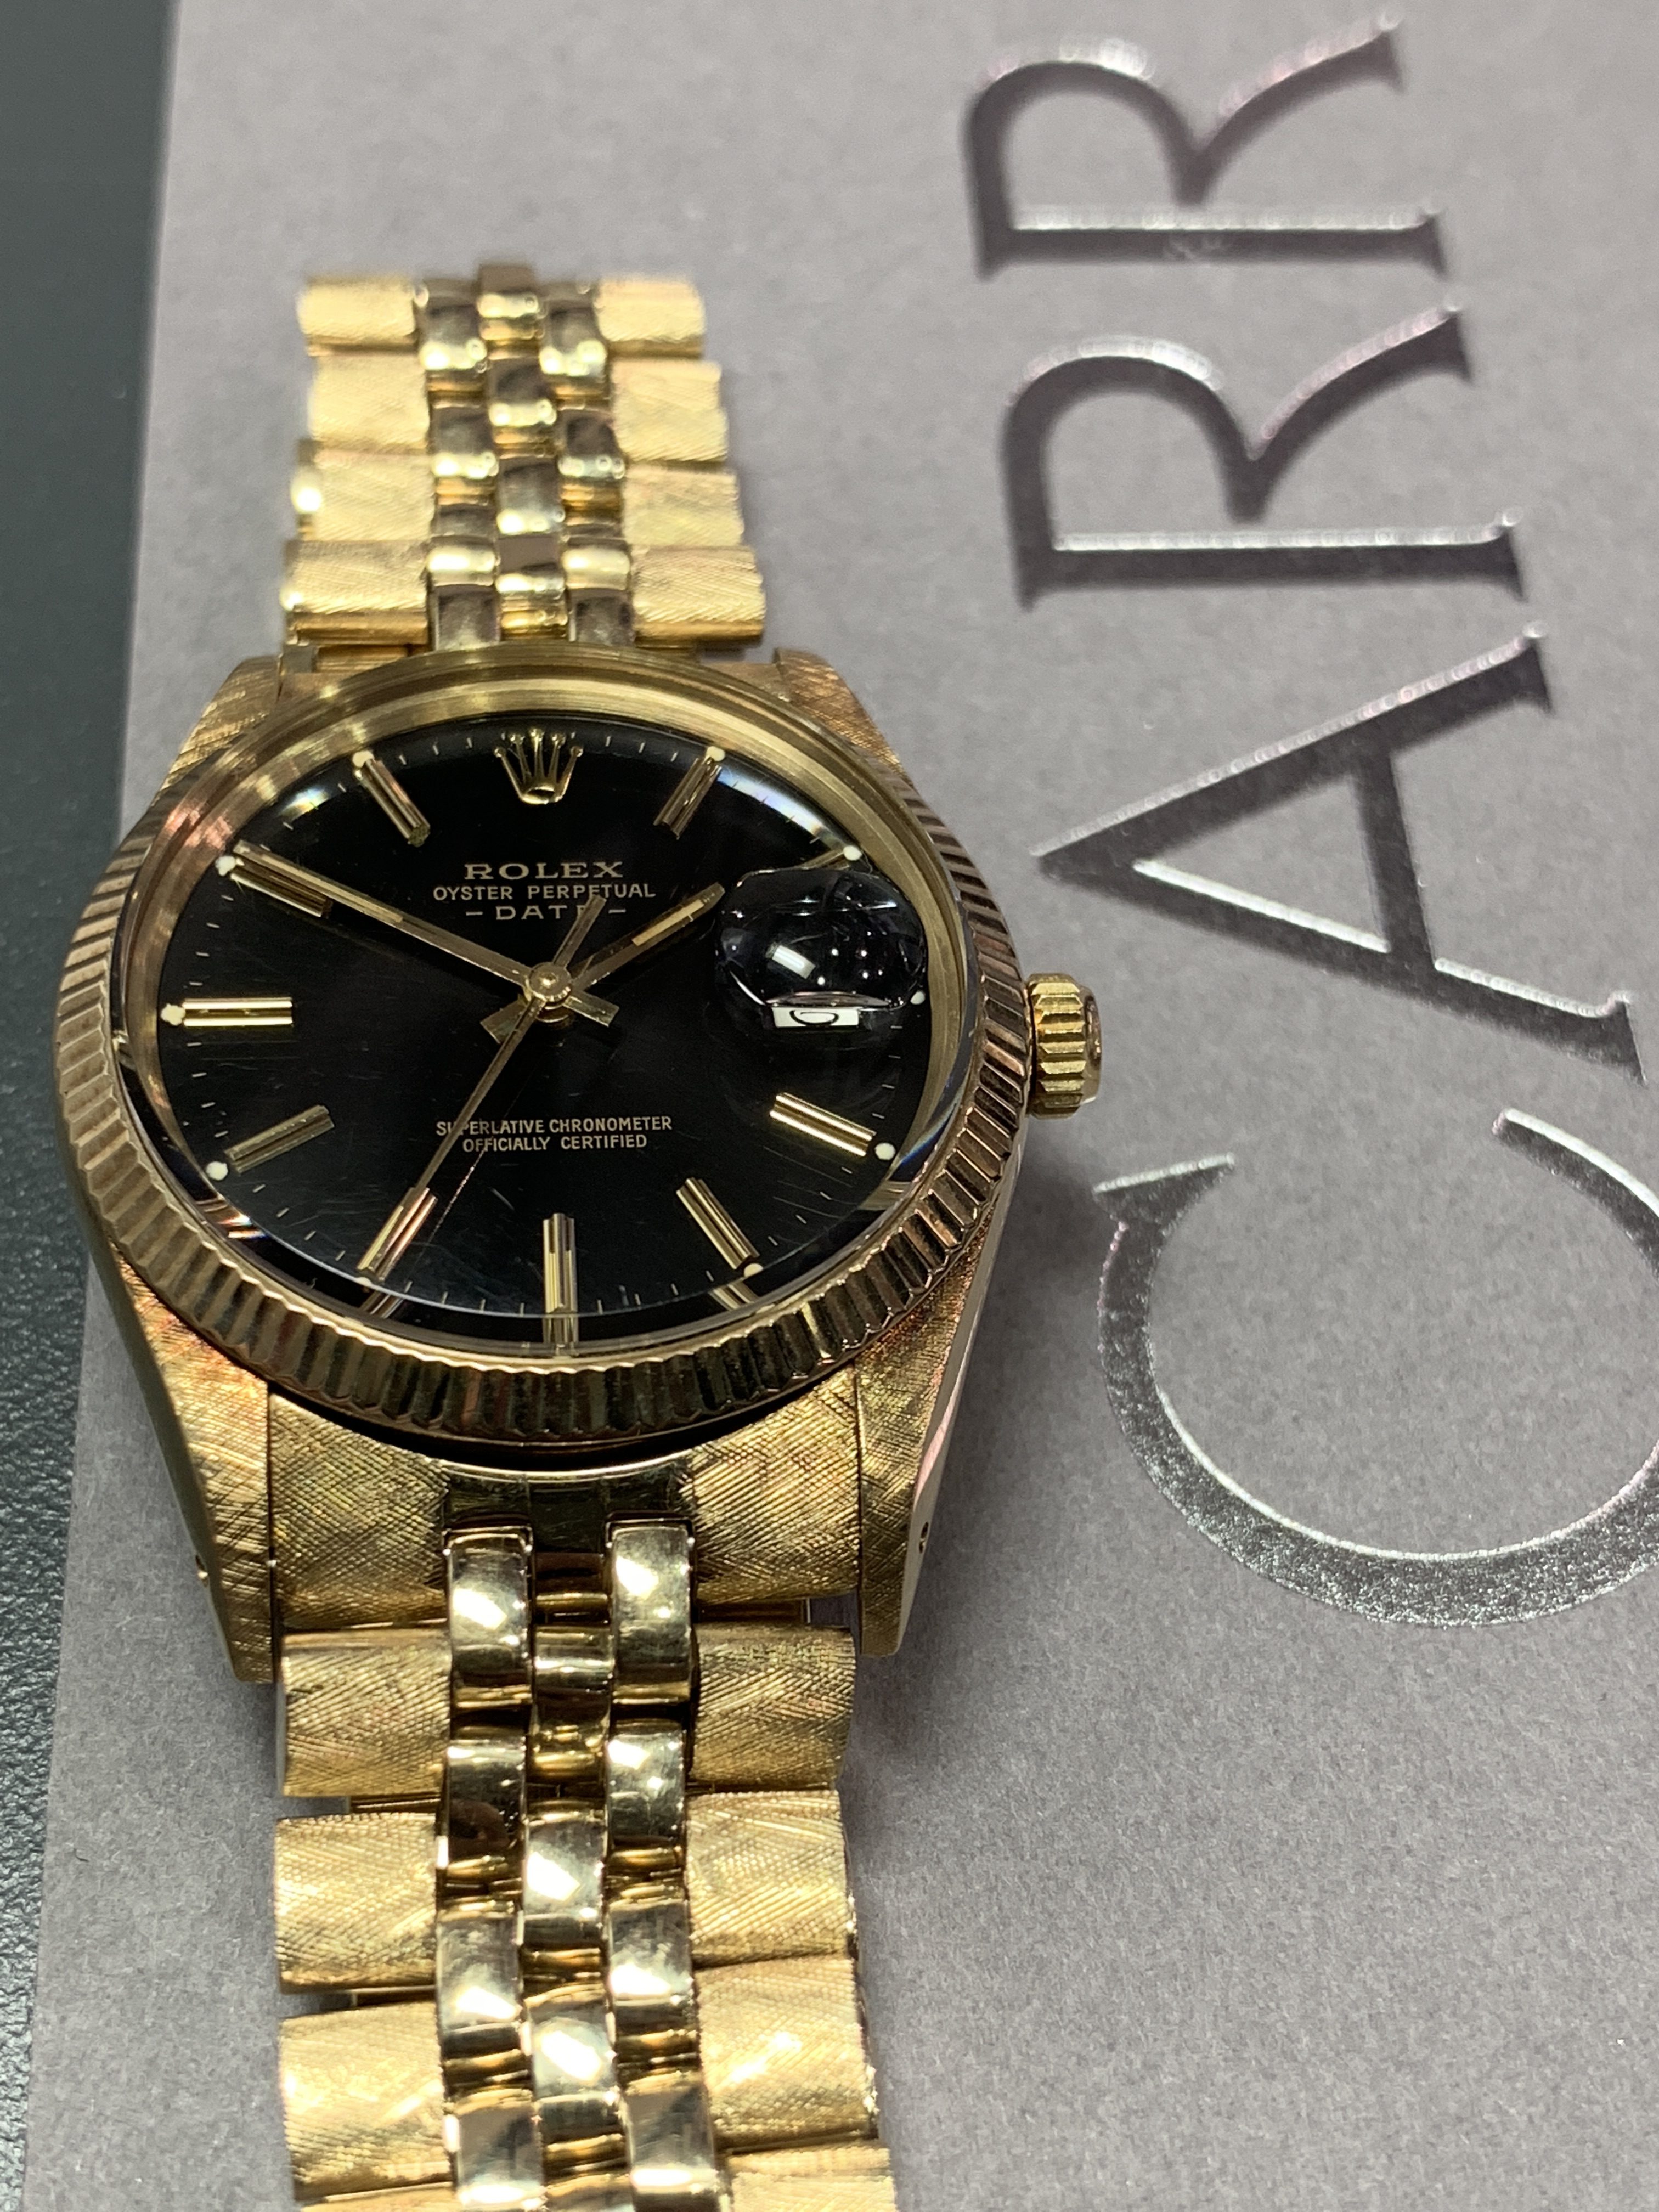 Rolex Oyster Perpetual Gold Price - How do you Price a Switches?